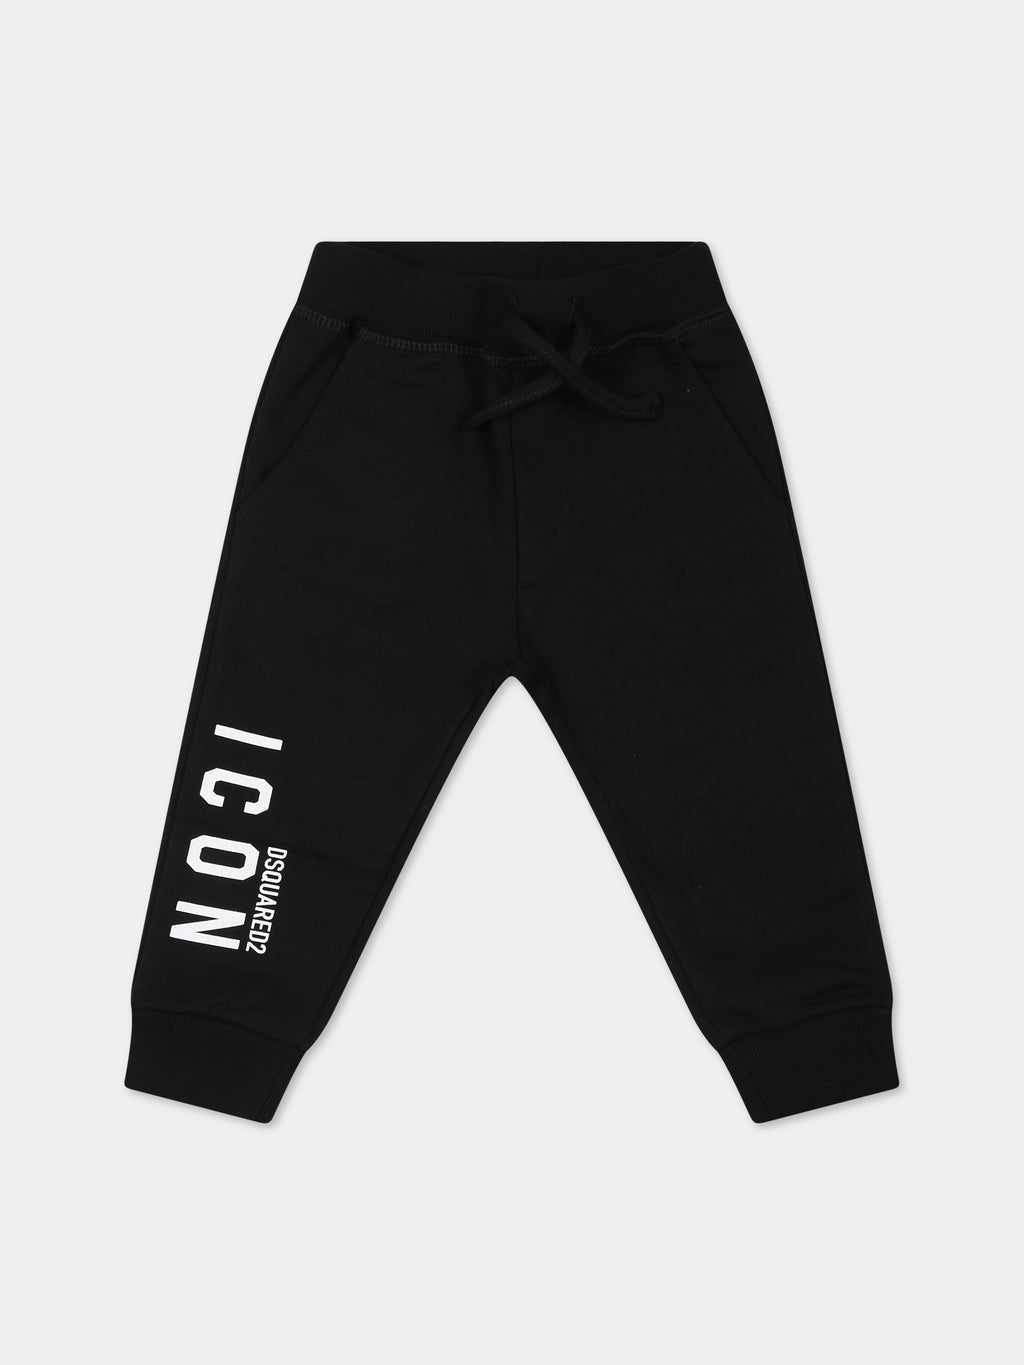 Black trousers for baby boy with logo